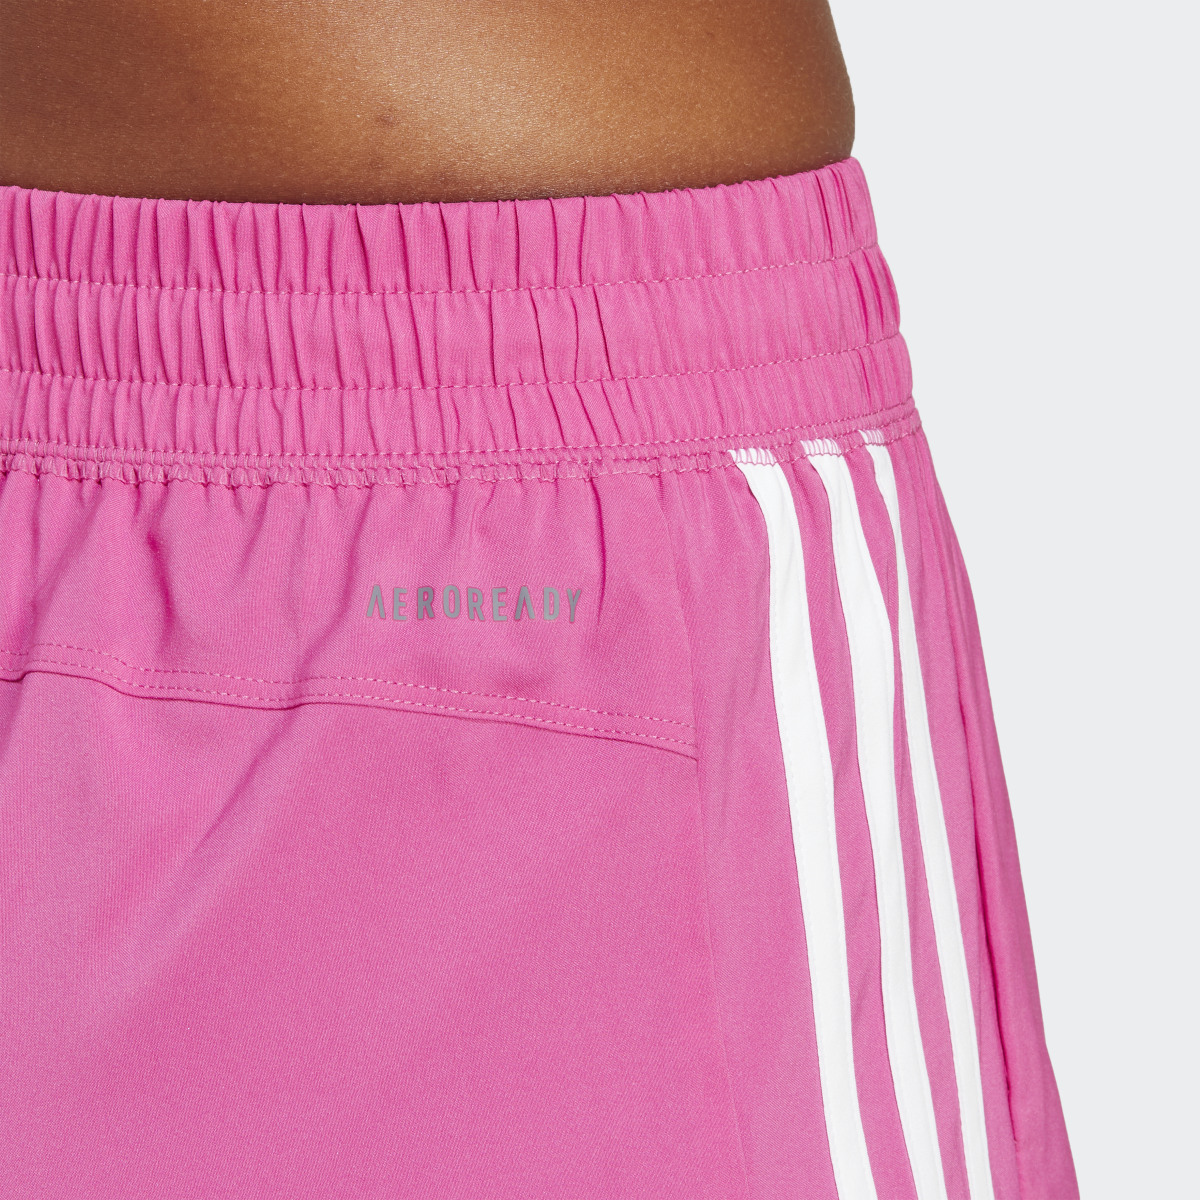 Adidas Pacer 3-Stripes Woven Shorts. 6